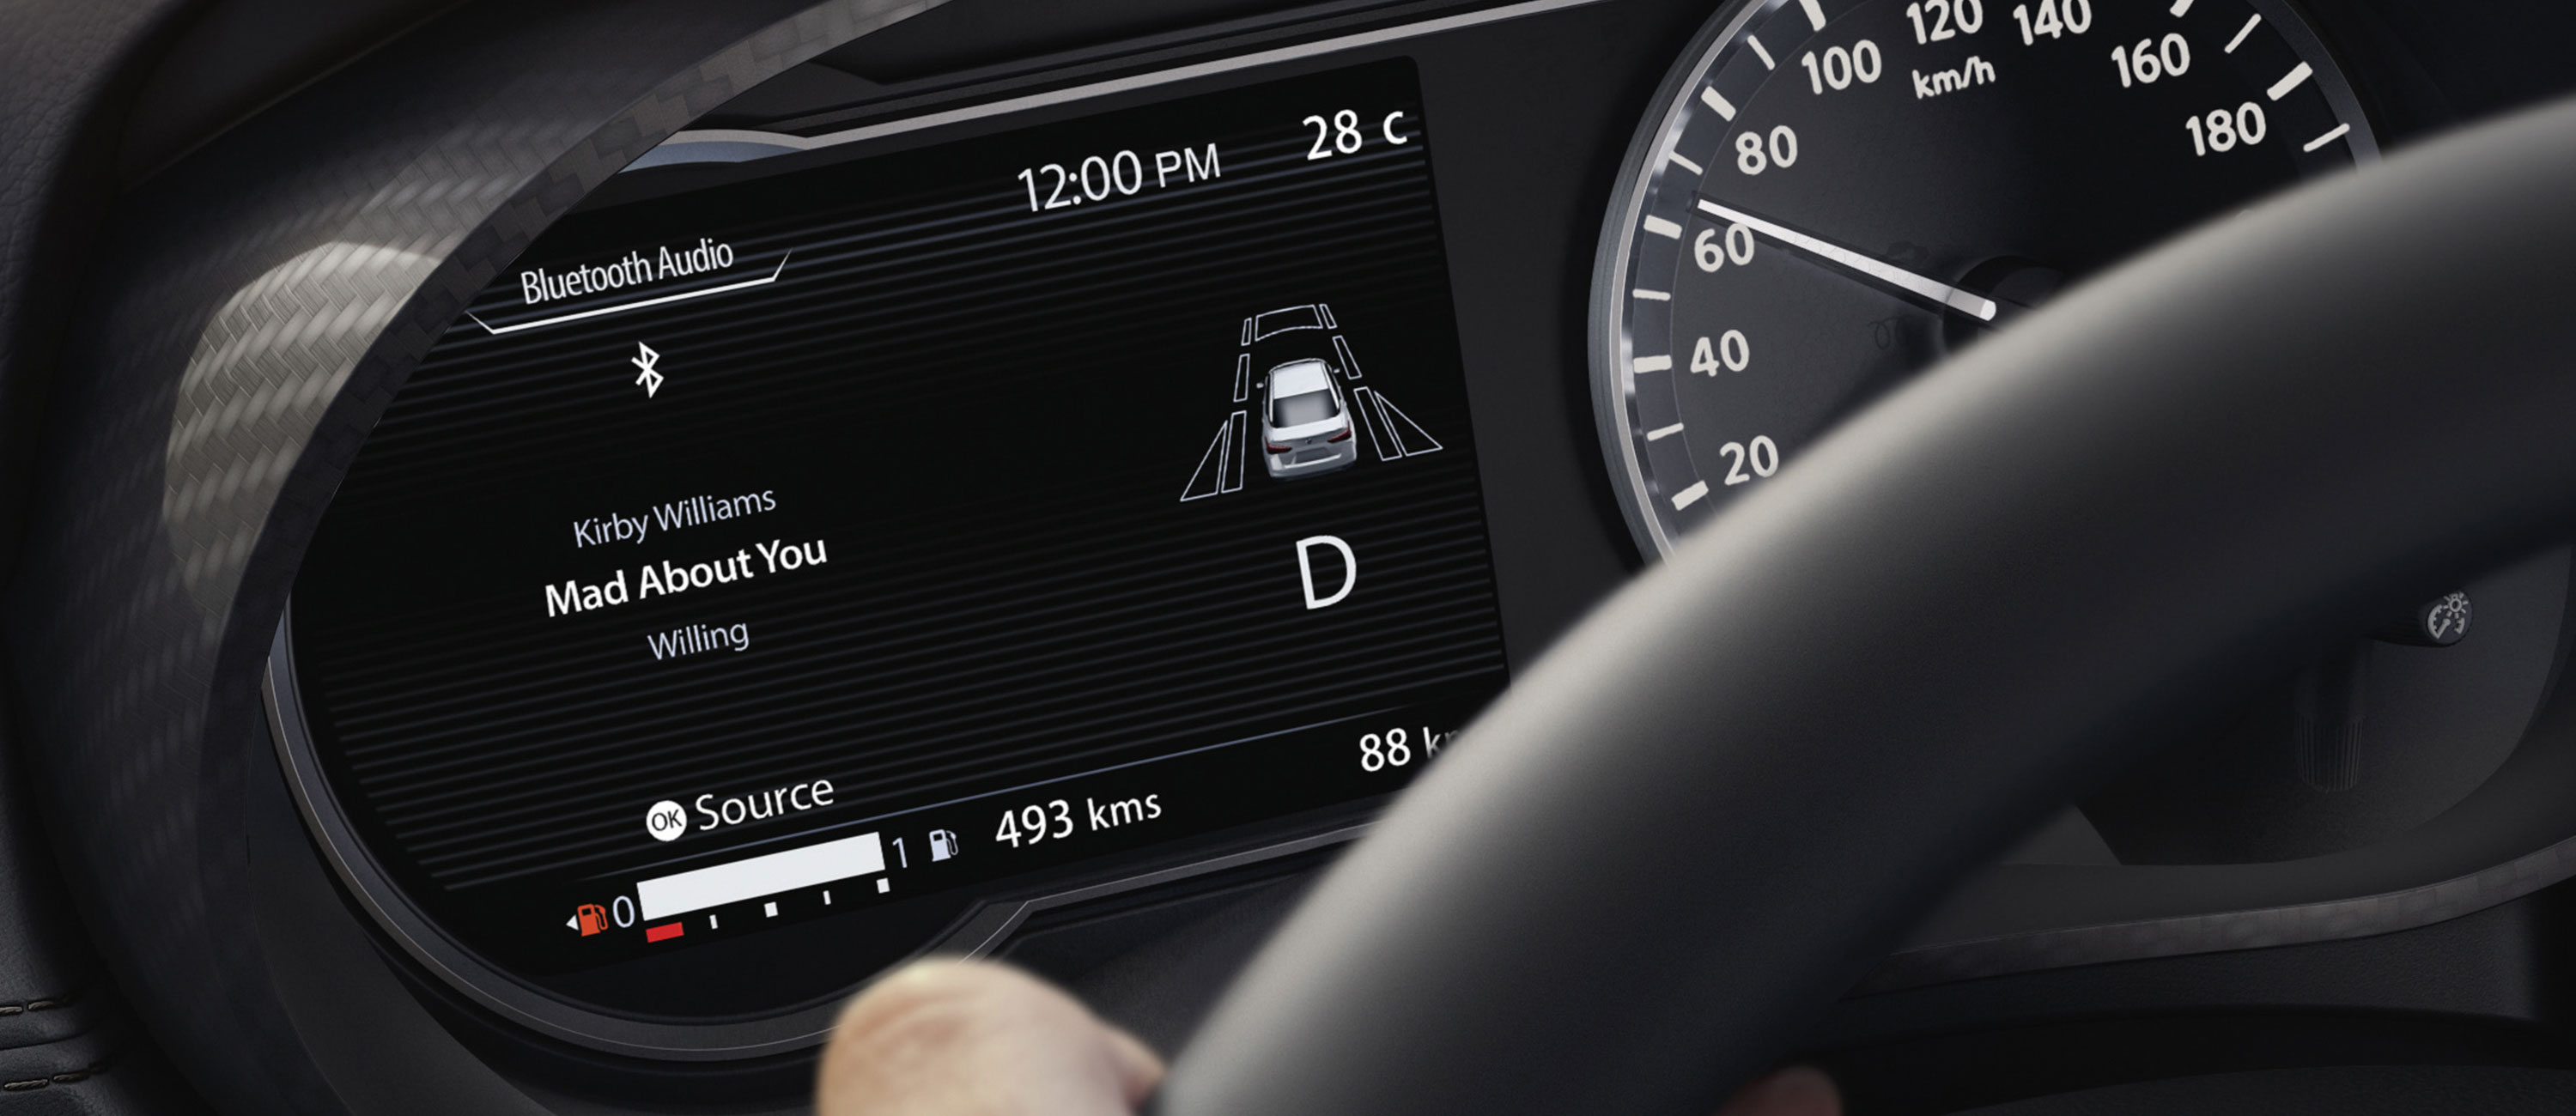 Nissan SUNNY Advanced Drive Assist Display showing music screen & BLUETOOTH® AUDIO